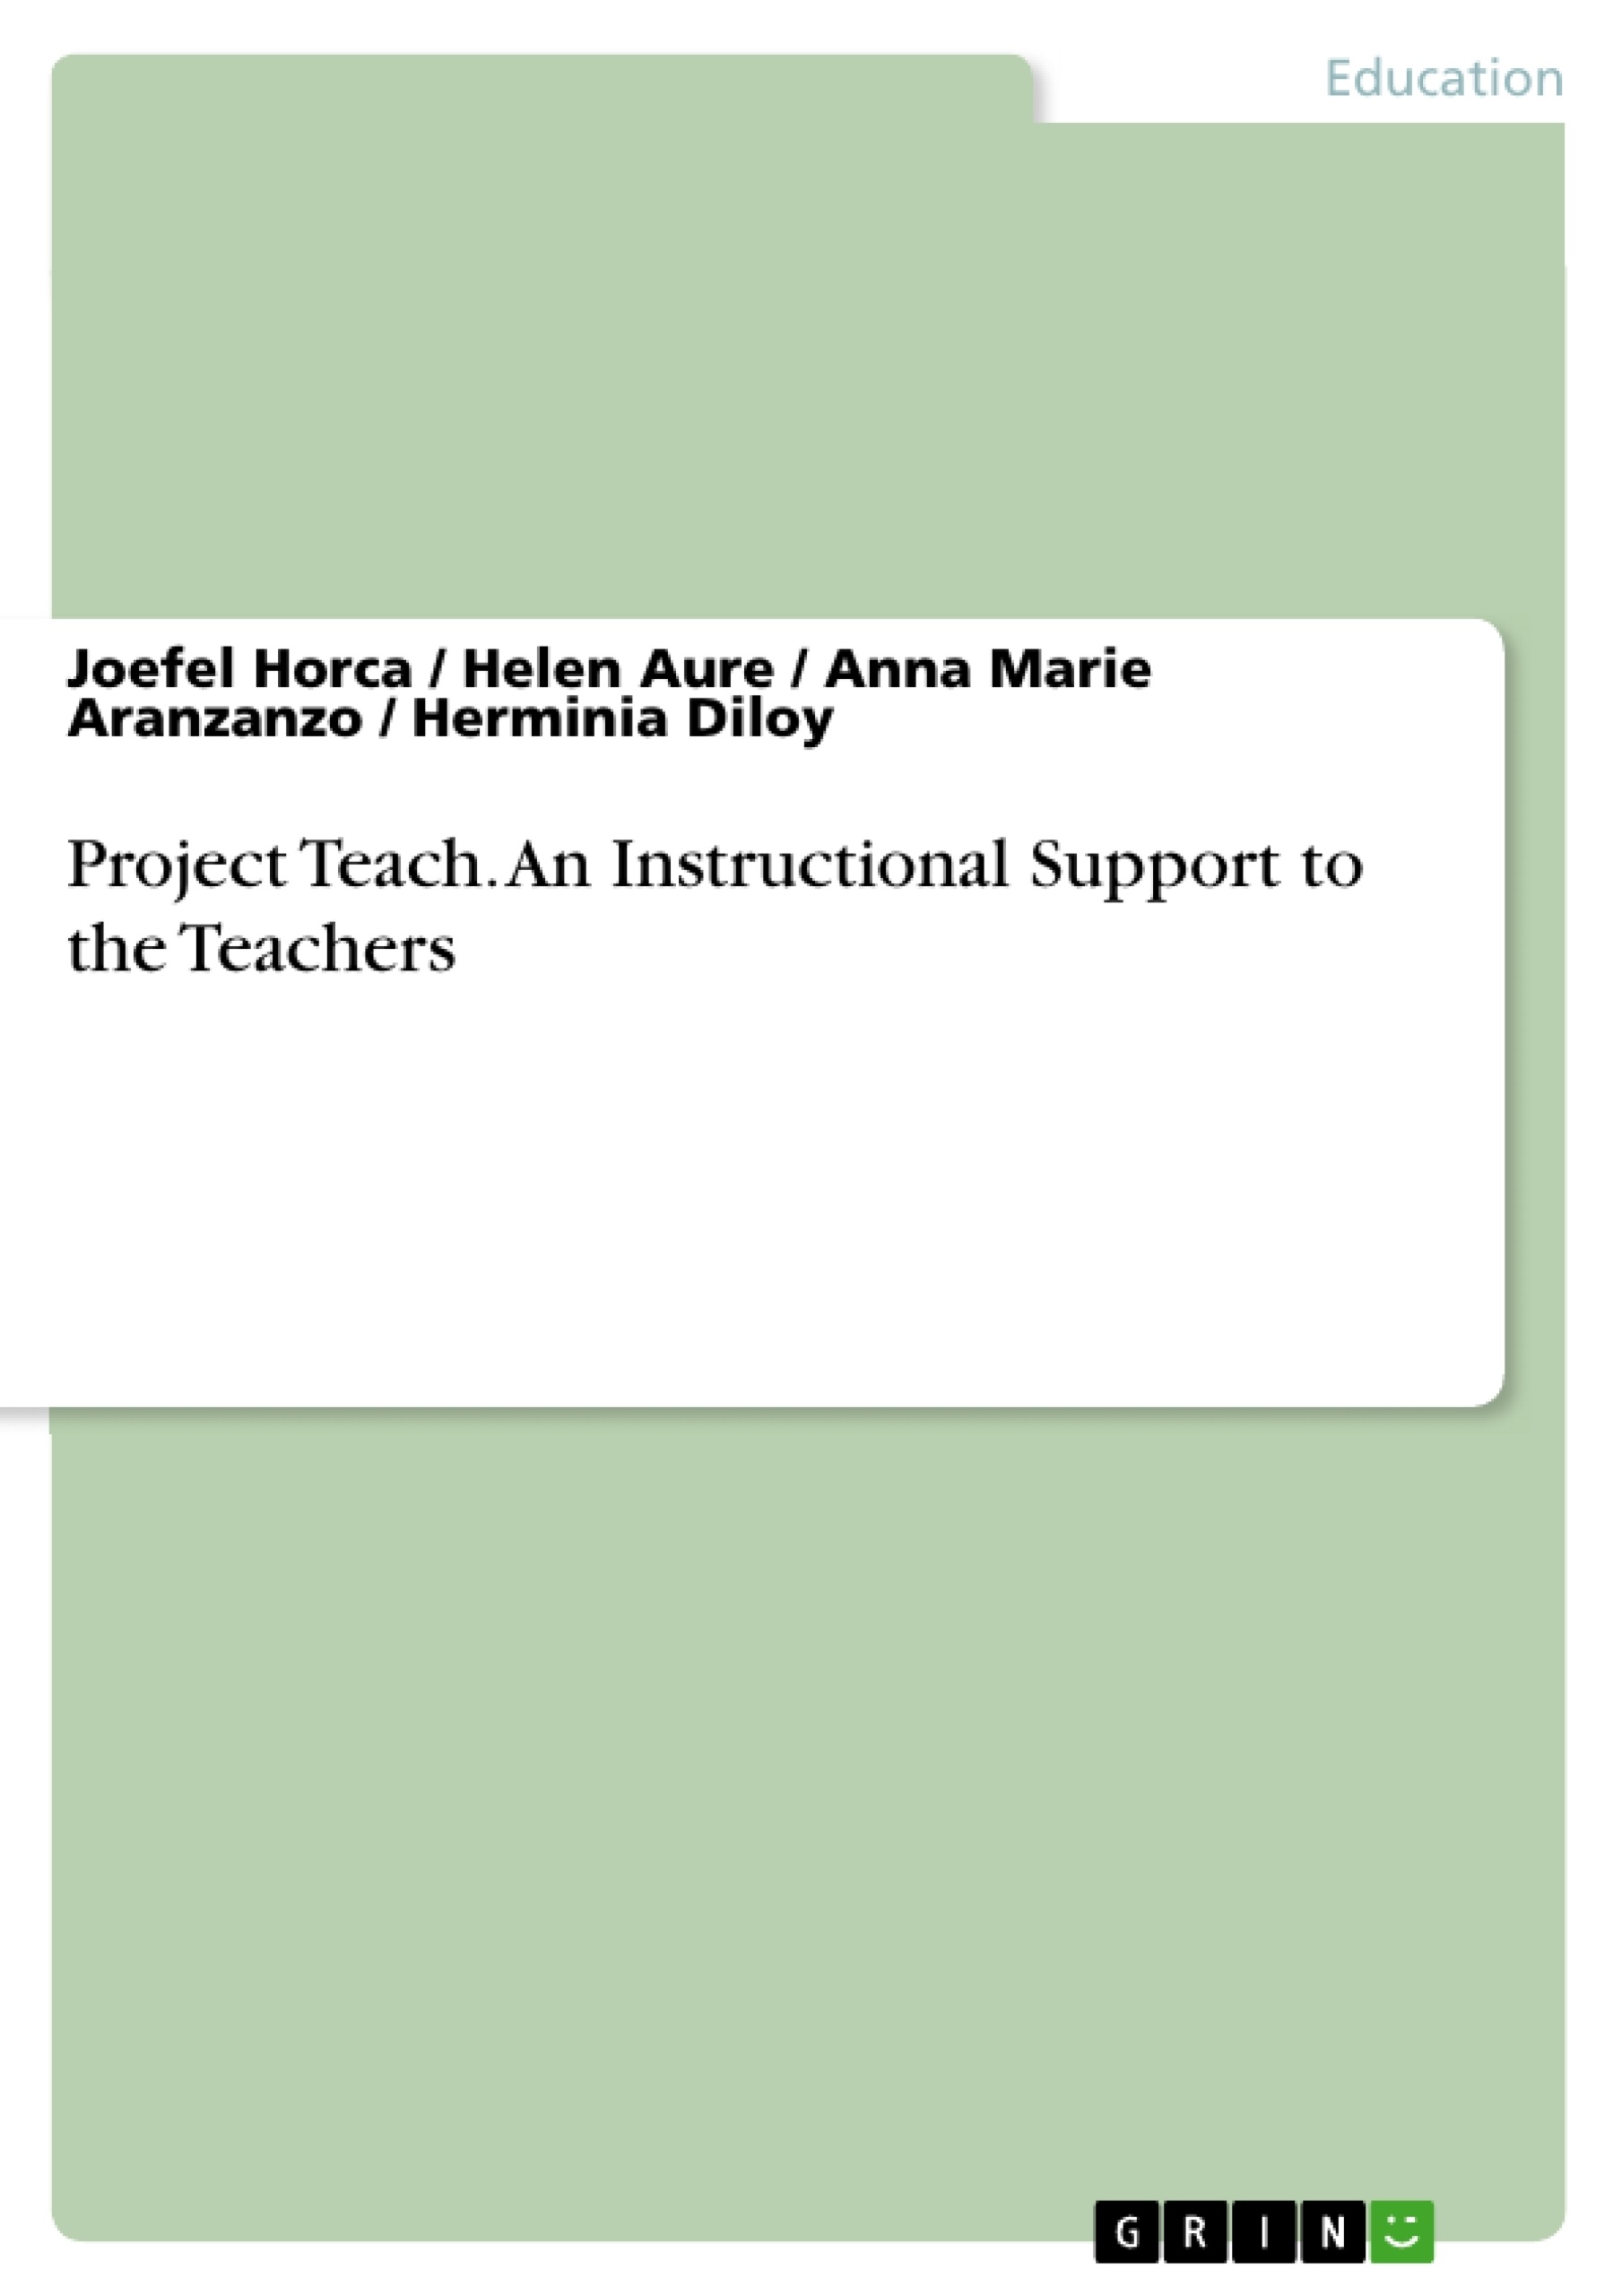 Título: Project Teach. An Instructional Support to the Teachers